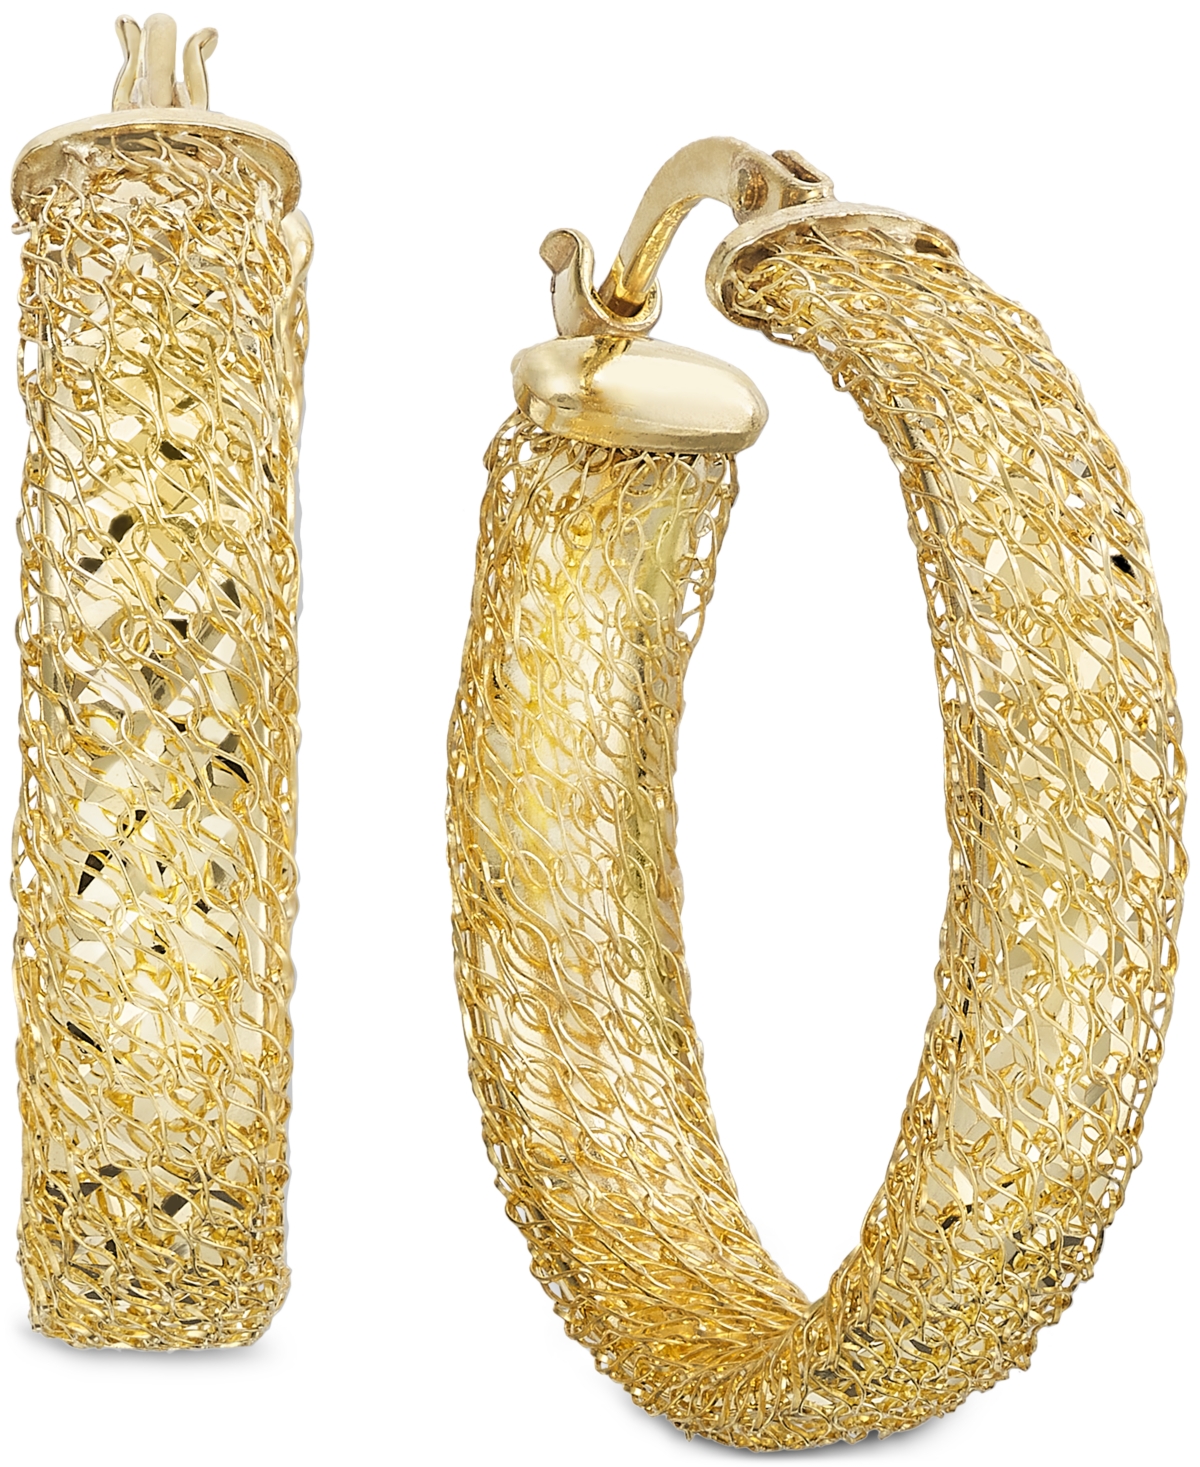 Textured Weave Small Hoop Earrings in 10k Gold, 20mm - Gold